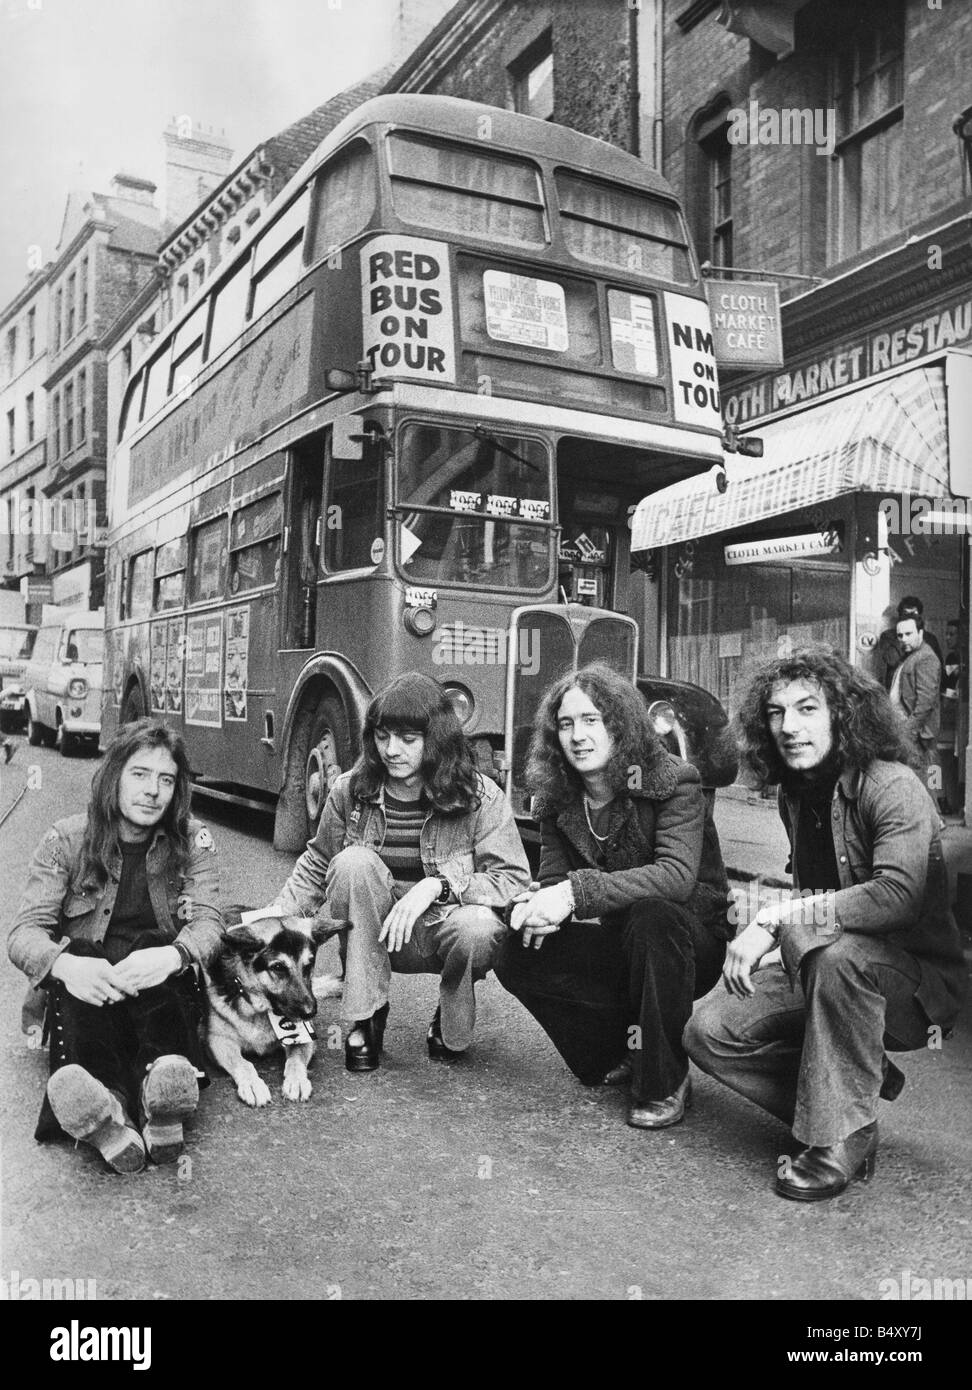 Geordie the former band of Brian Johnson lead singer of the rock group AC  DC on the Red Bus Tour Left to right Vic Malcolm Brian Gibson Tom Hill  Brian Johnson 26